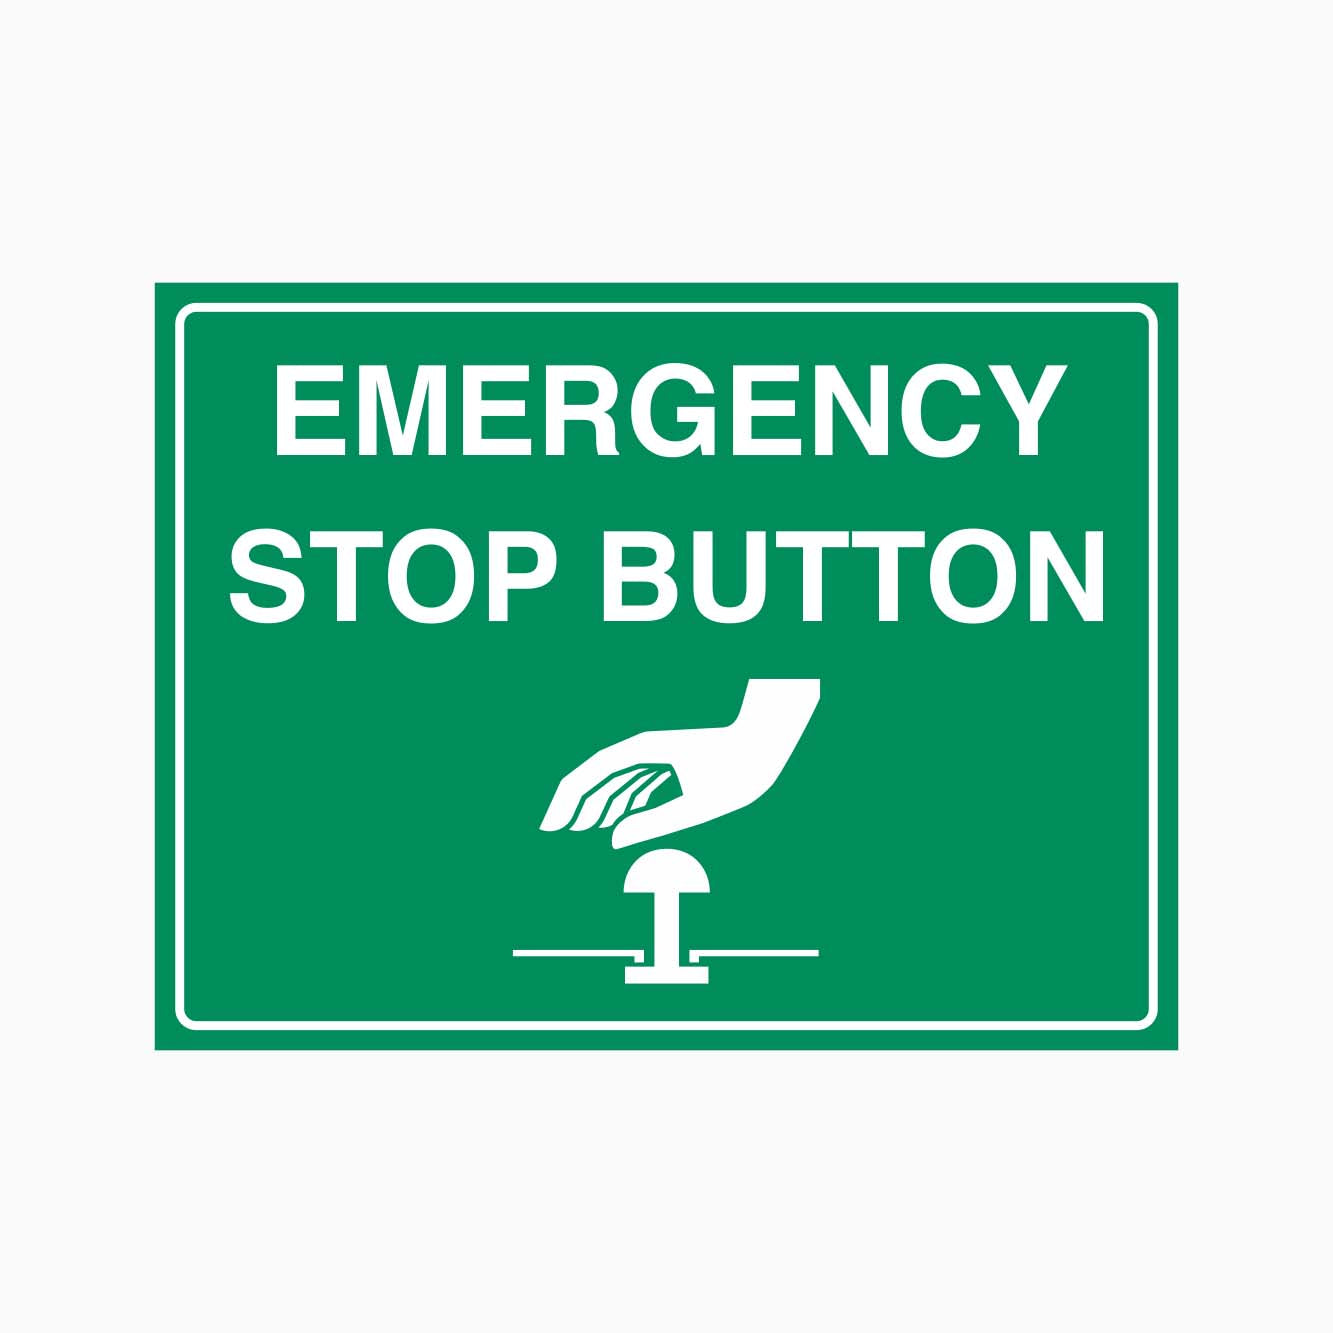 EMERGENCY STOP BUTTON SIGN - GET SIGNS